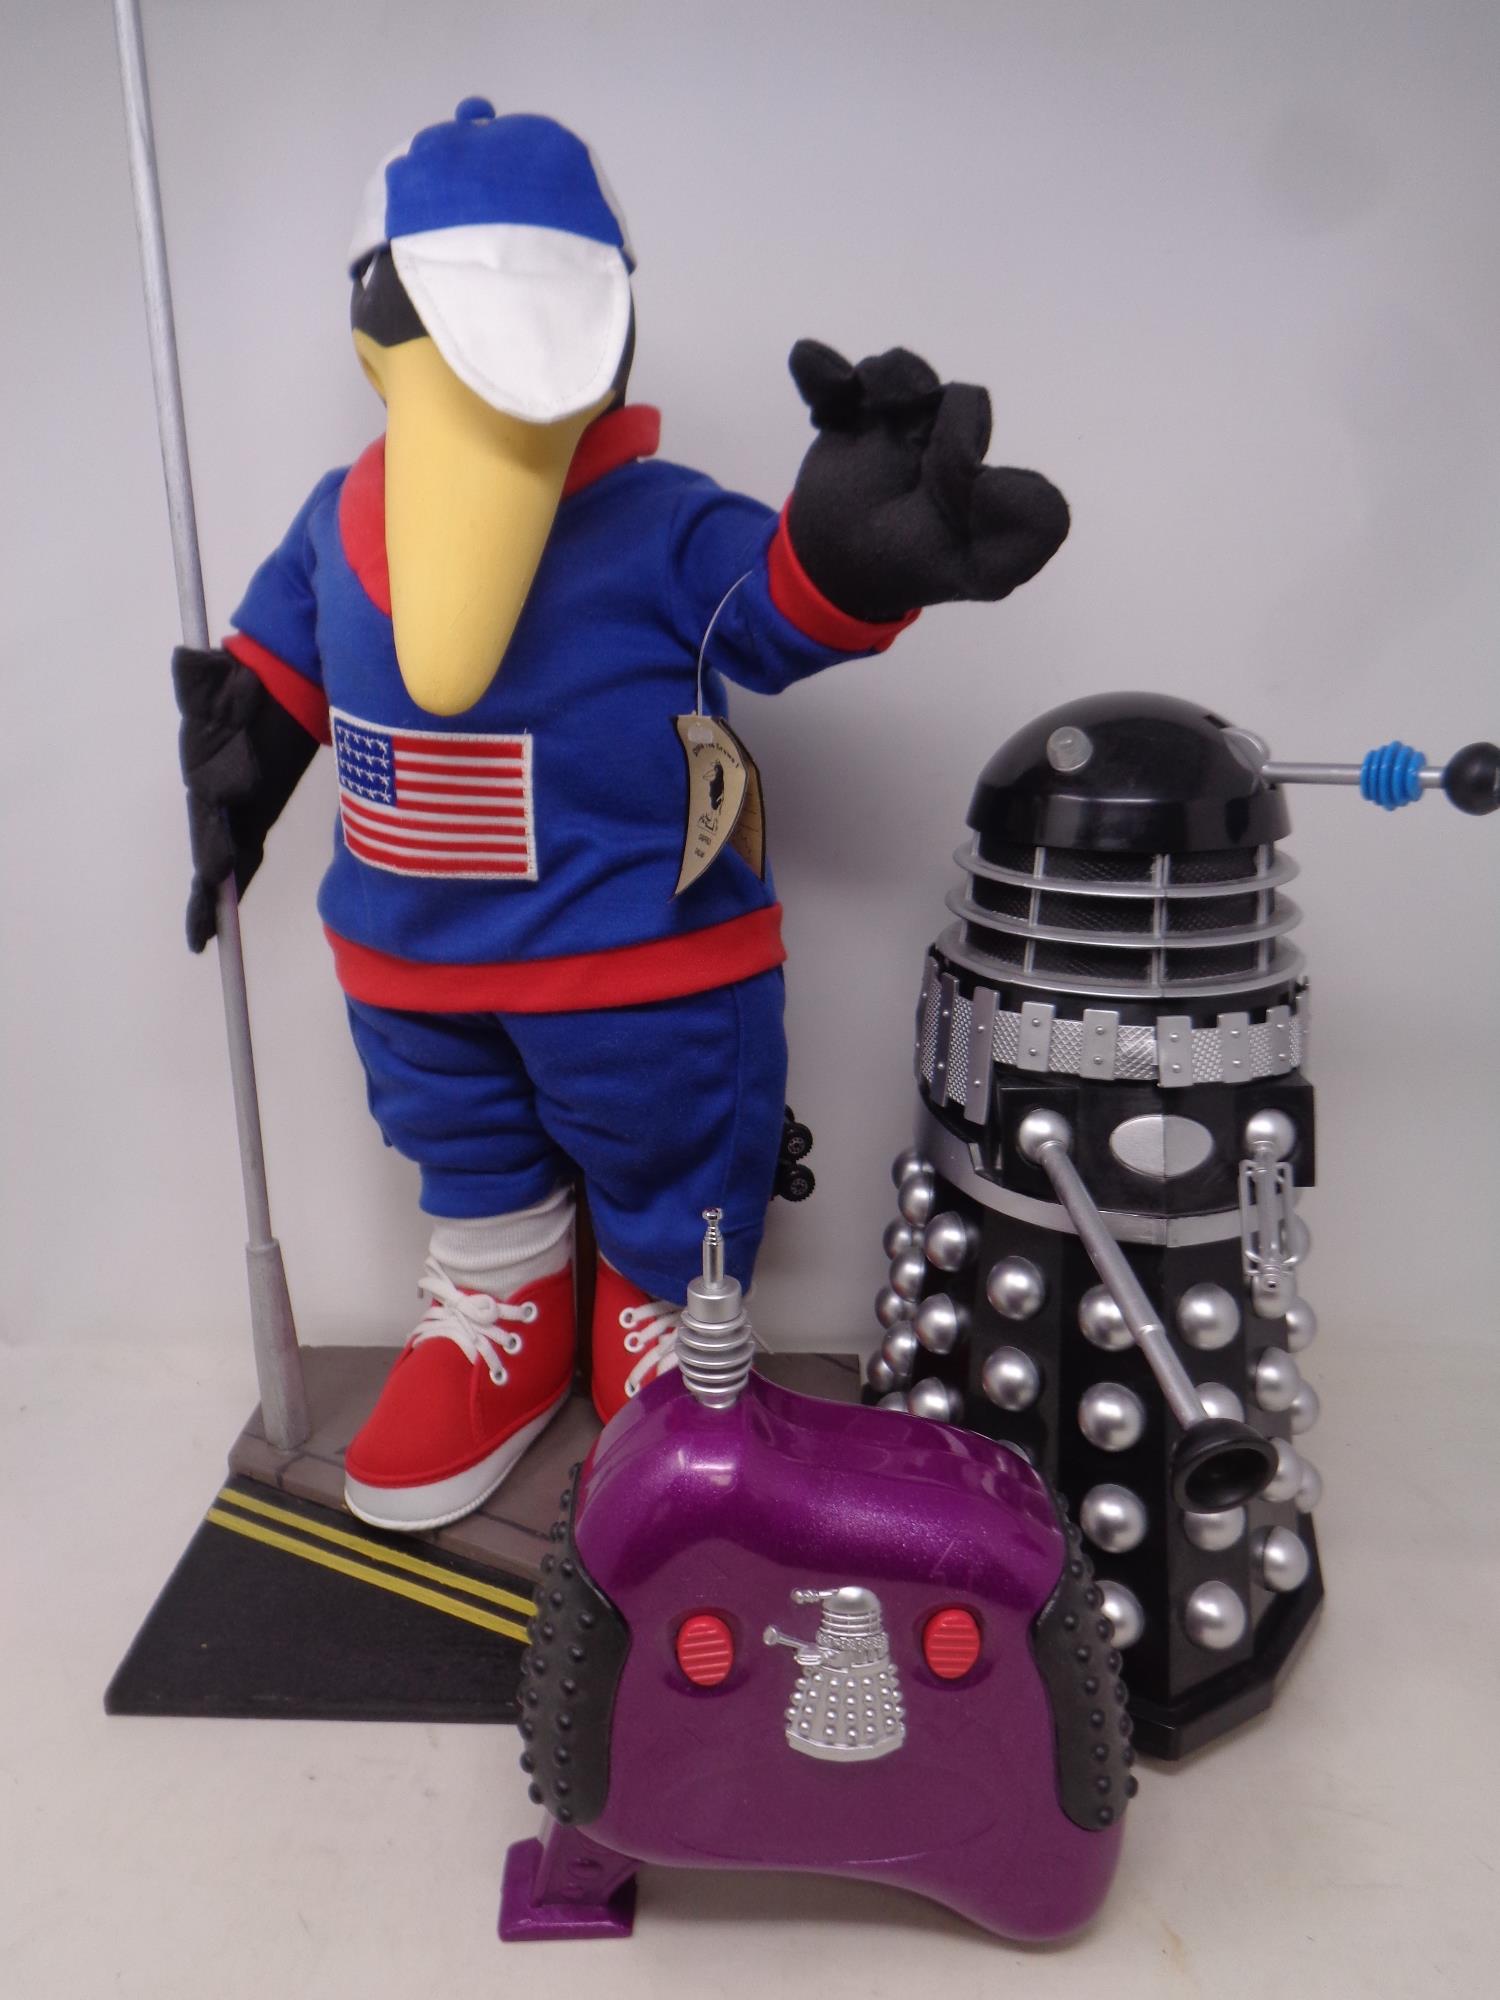 A remote controlled Dalek together with a Stone the Crows soft toy ice skating figure with original